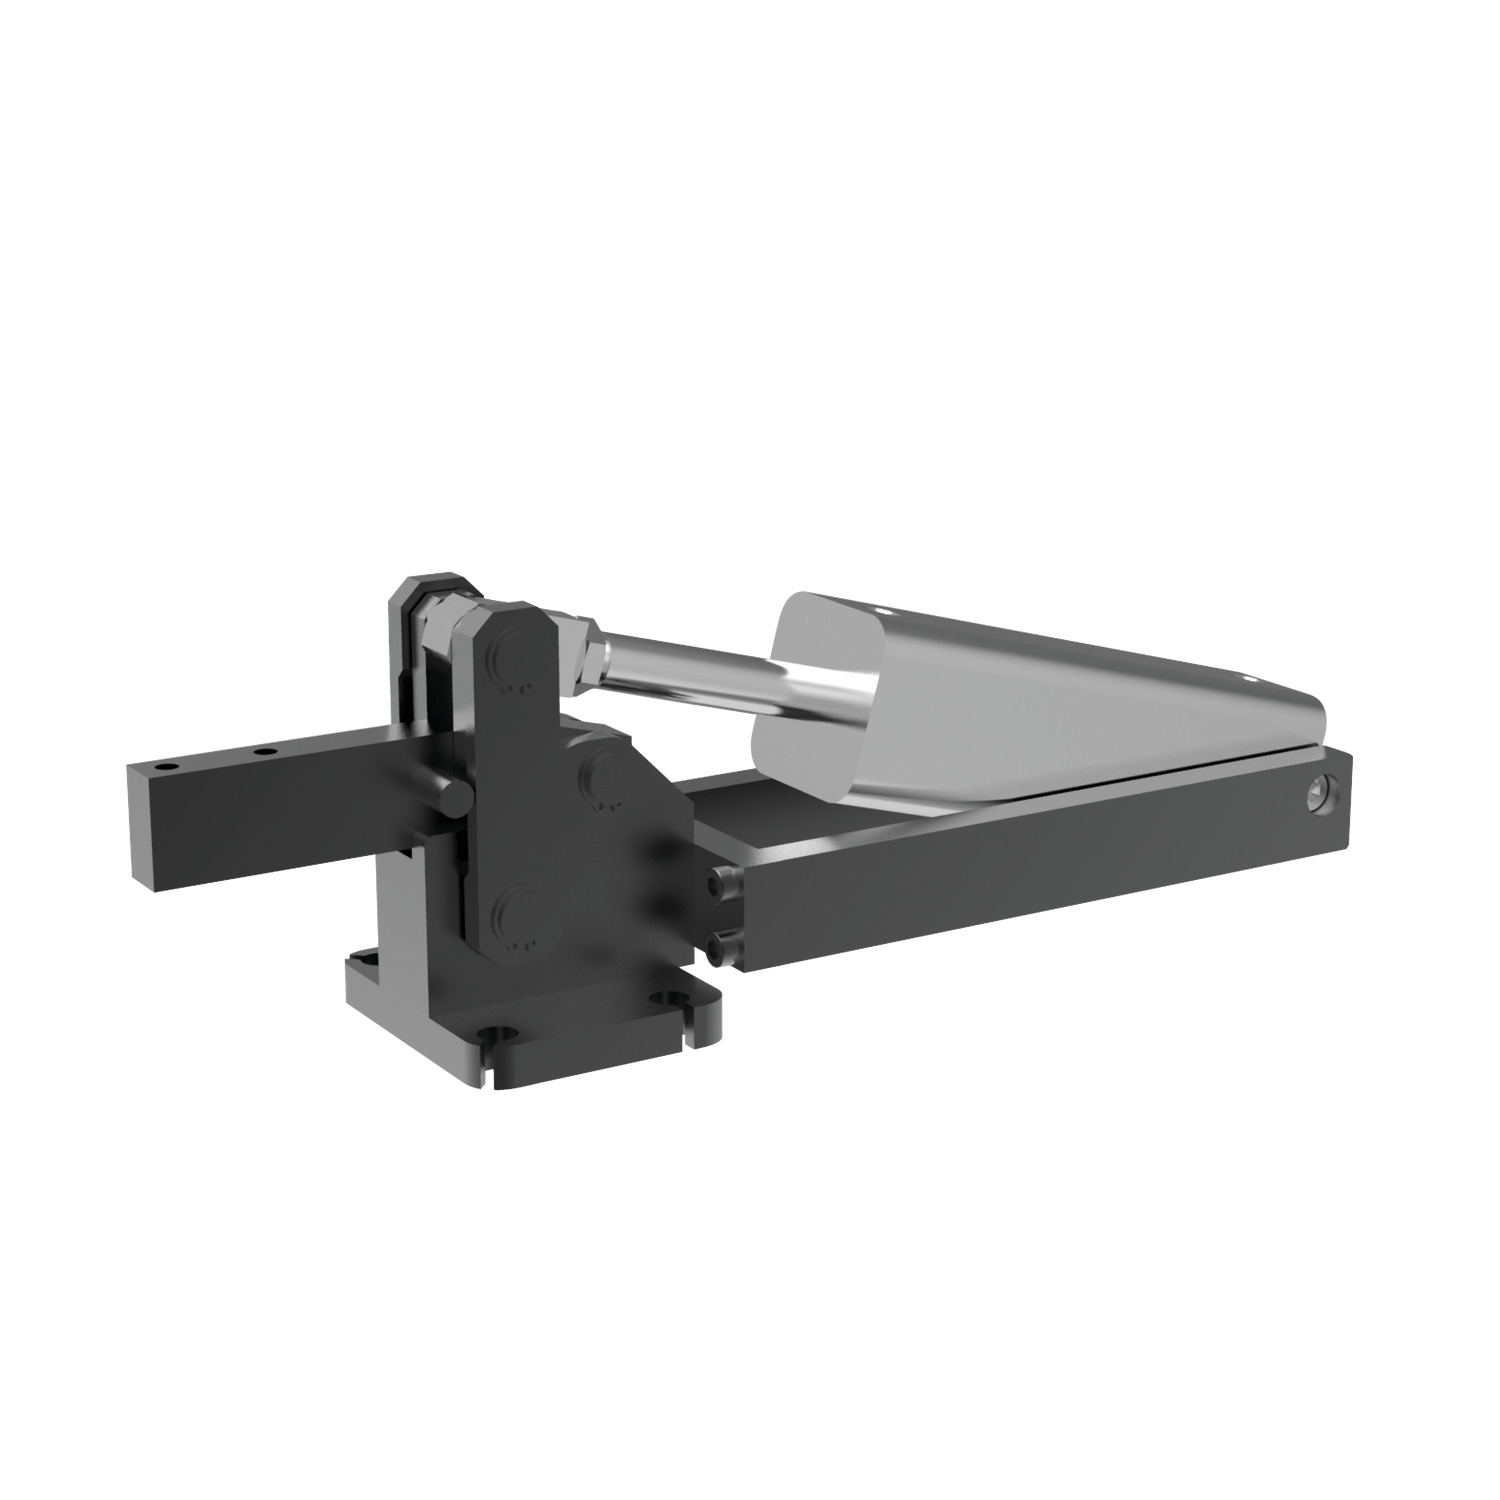 Product 47500, Heavy Duty Pneumatic Toggle Clamps with horizontal cylinder / 